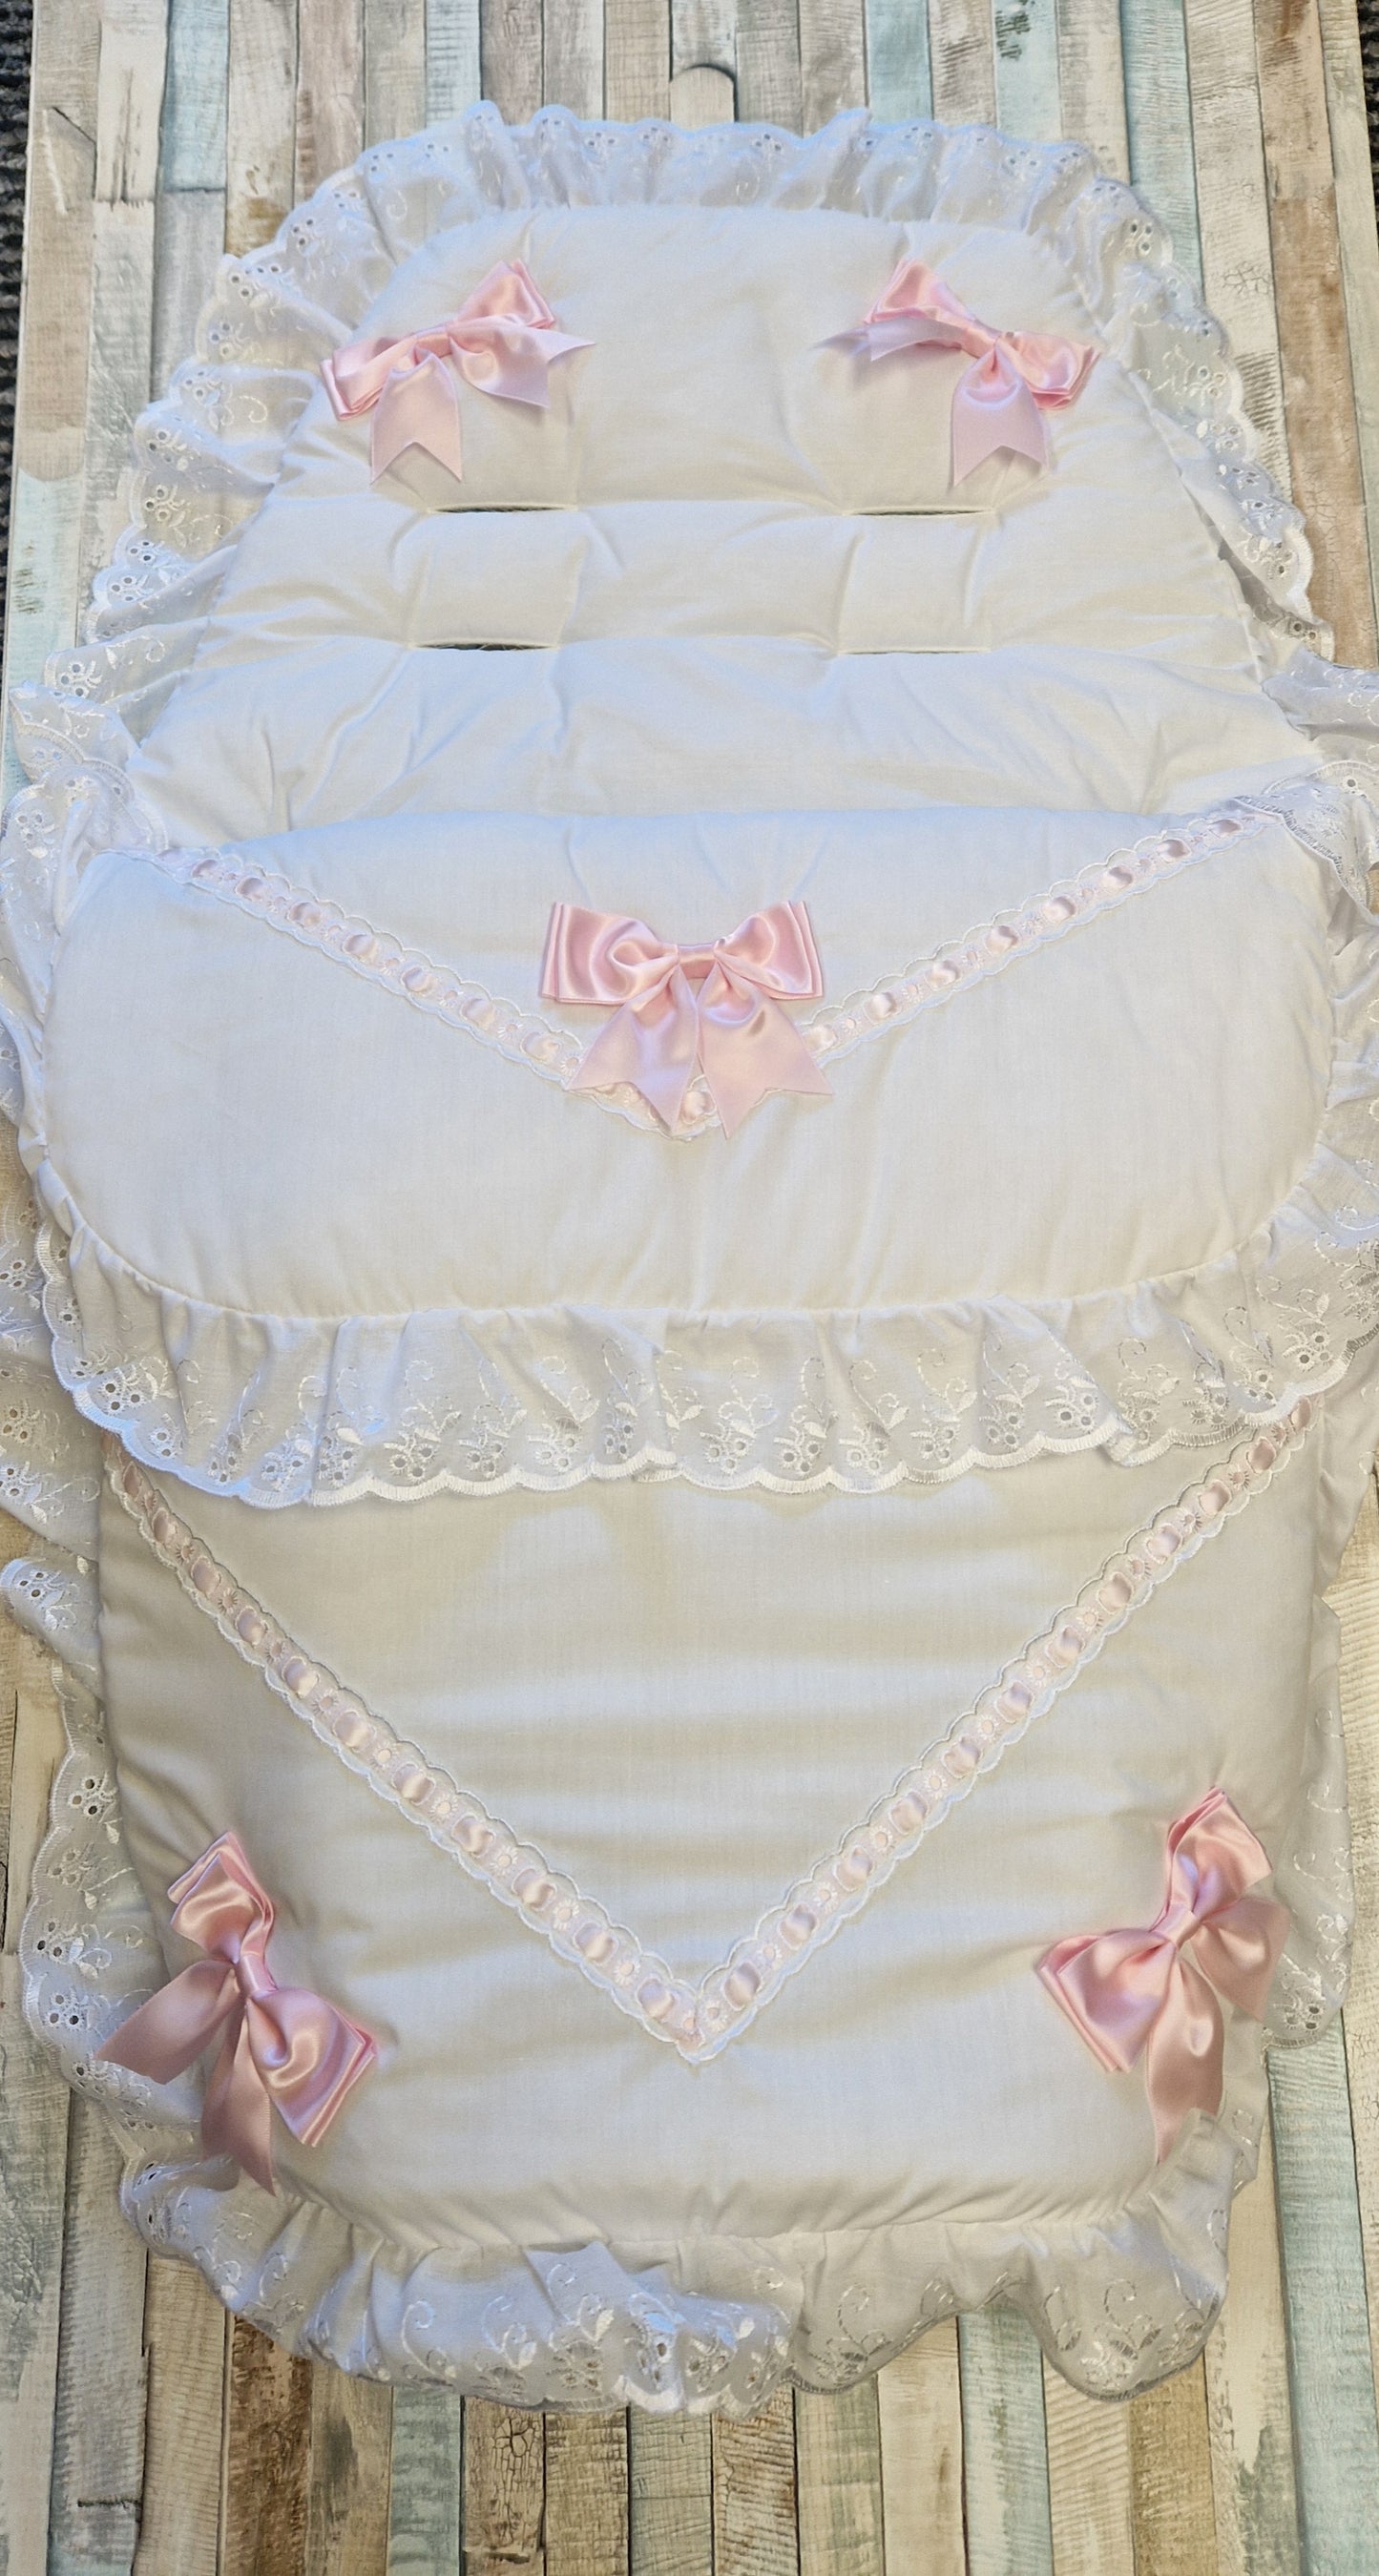 Baby Girls White Broderie Anglaise Lace Footmuff/ Cosytoes With 5 Pink Satin Bow